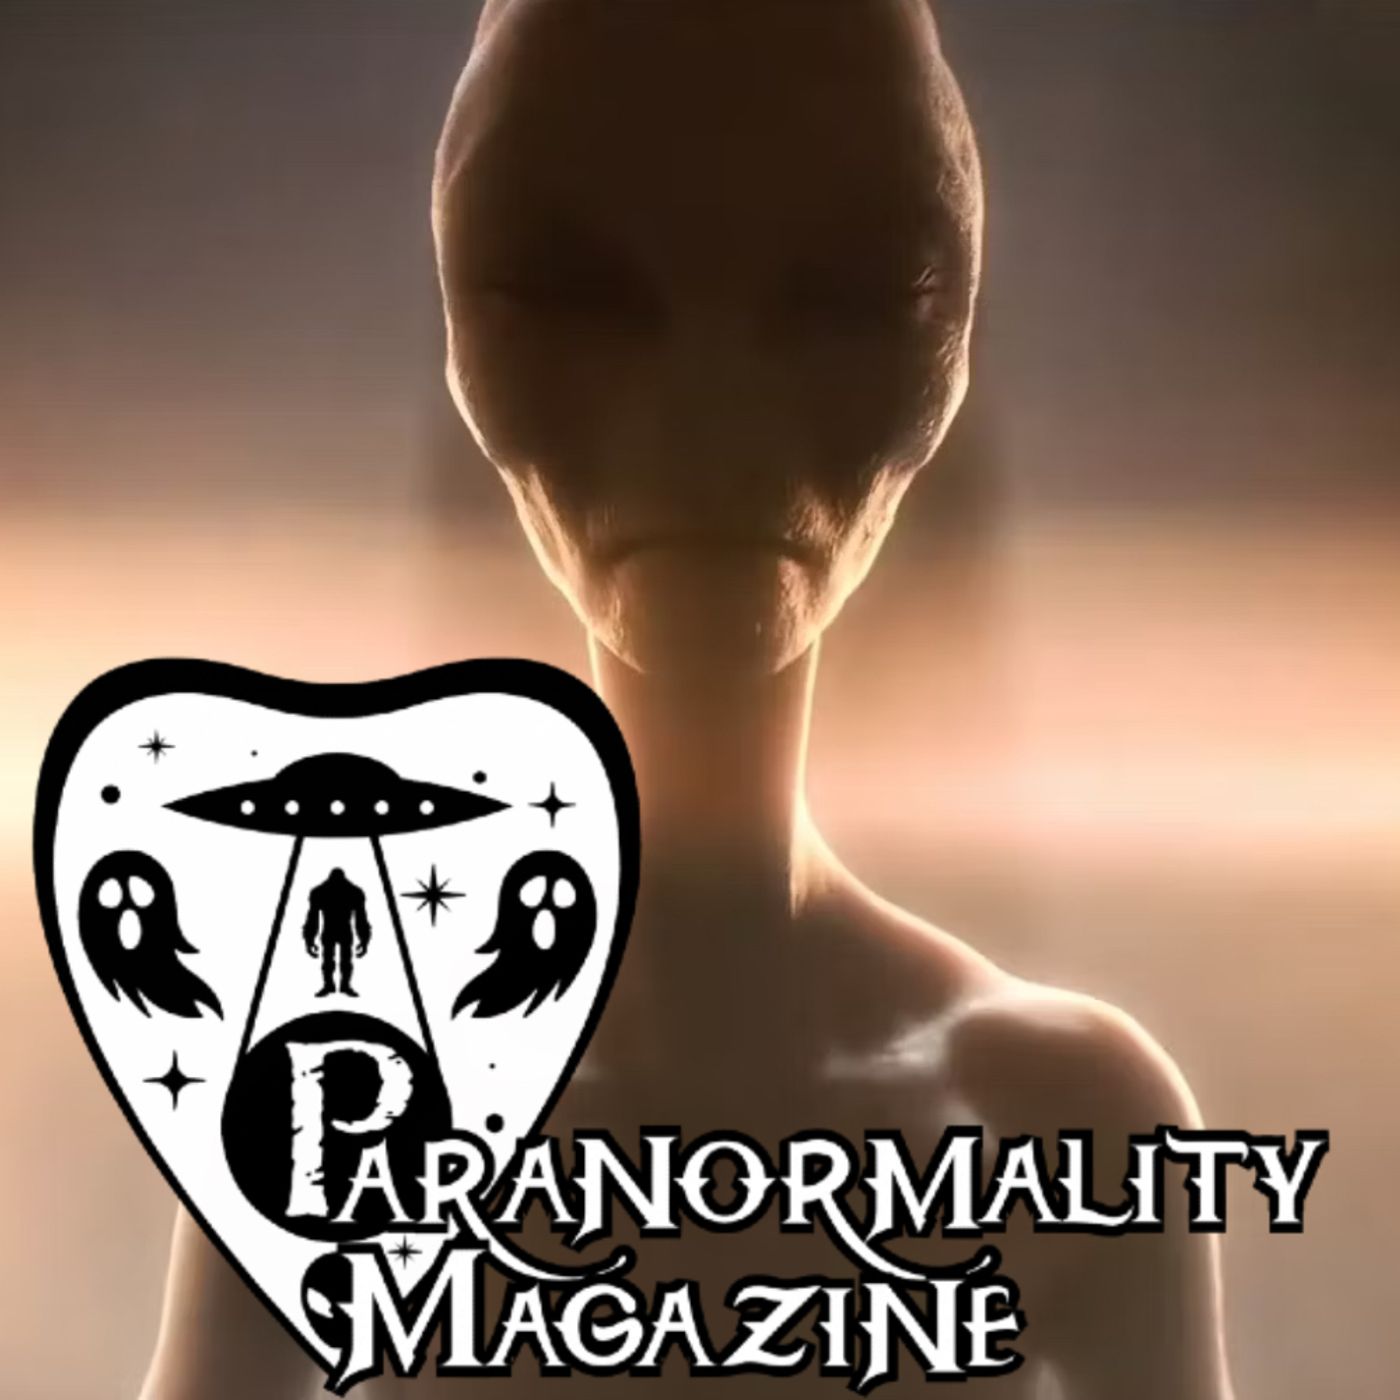 “PROJECT DELPHOS: UFOS AND INTERDIMENSIONAL BEINGS” and More Fortean Stories! #ParanormalityMag